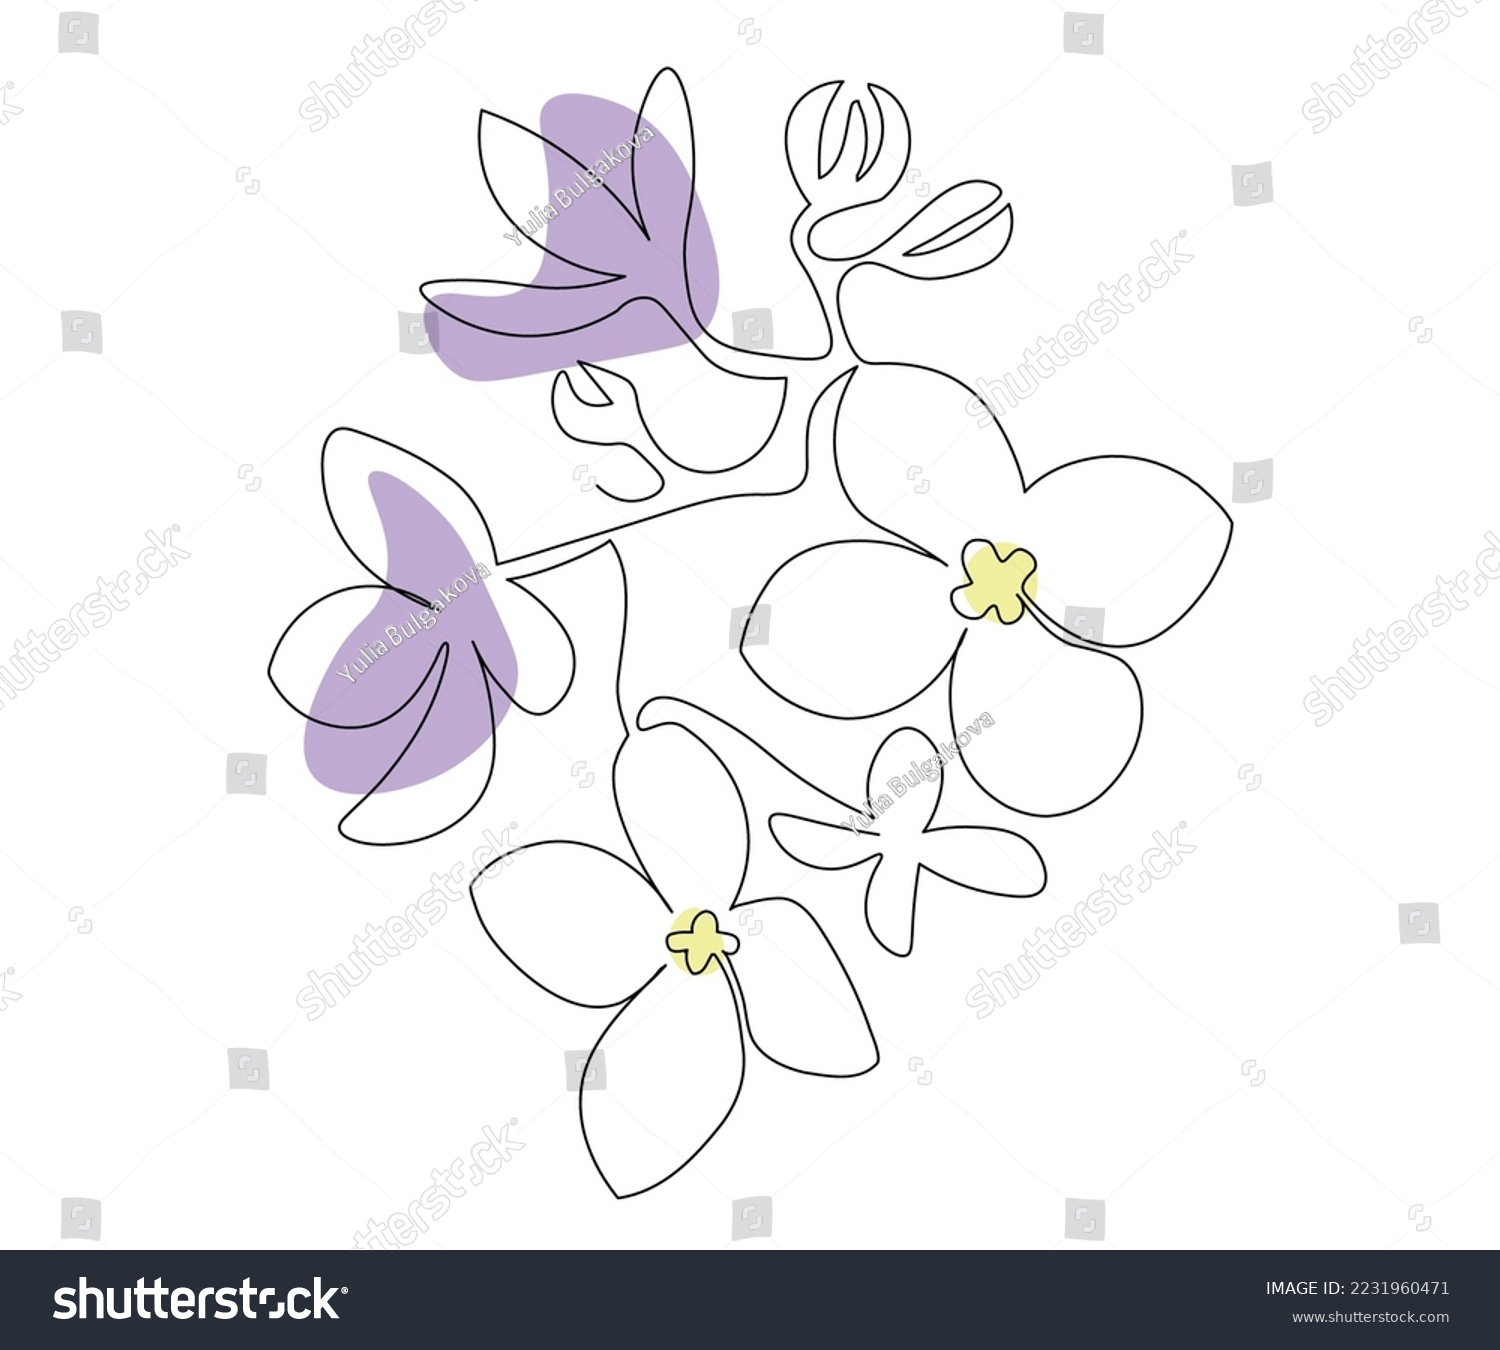 SVG of abstract violet or lilac flower in on line art style svg